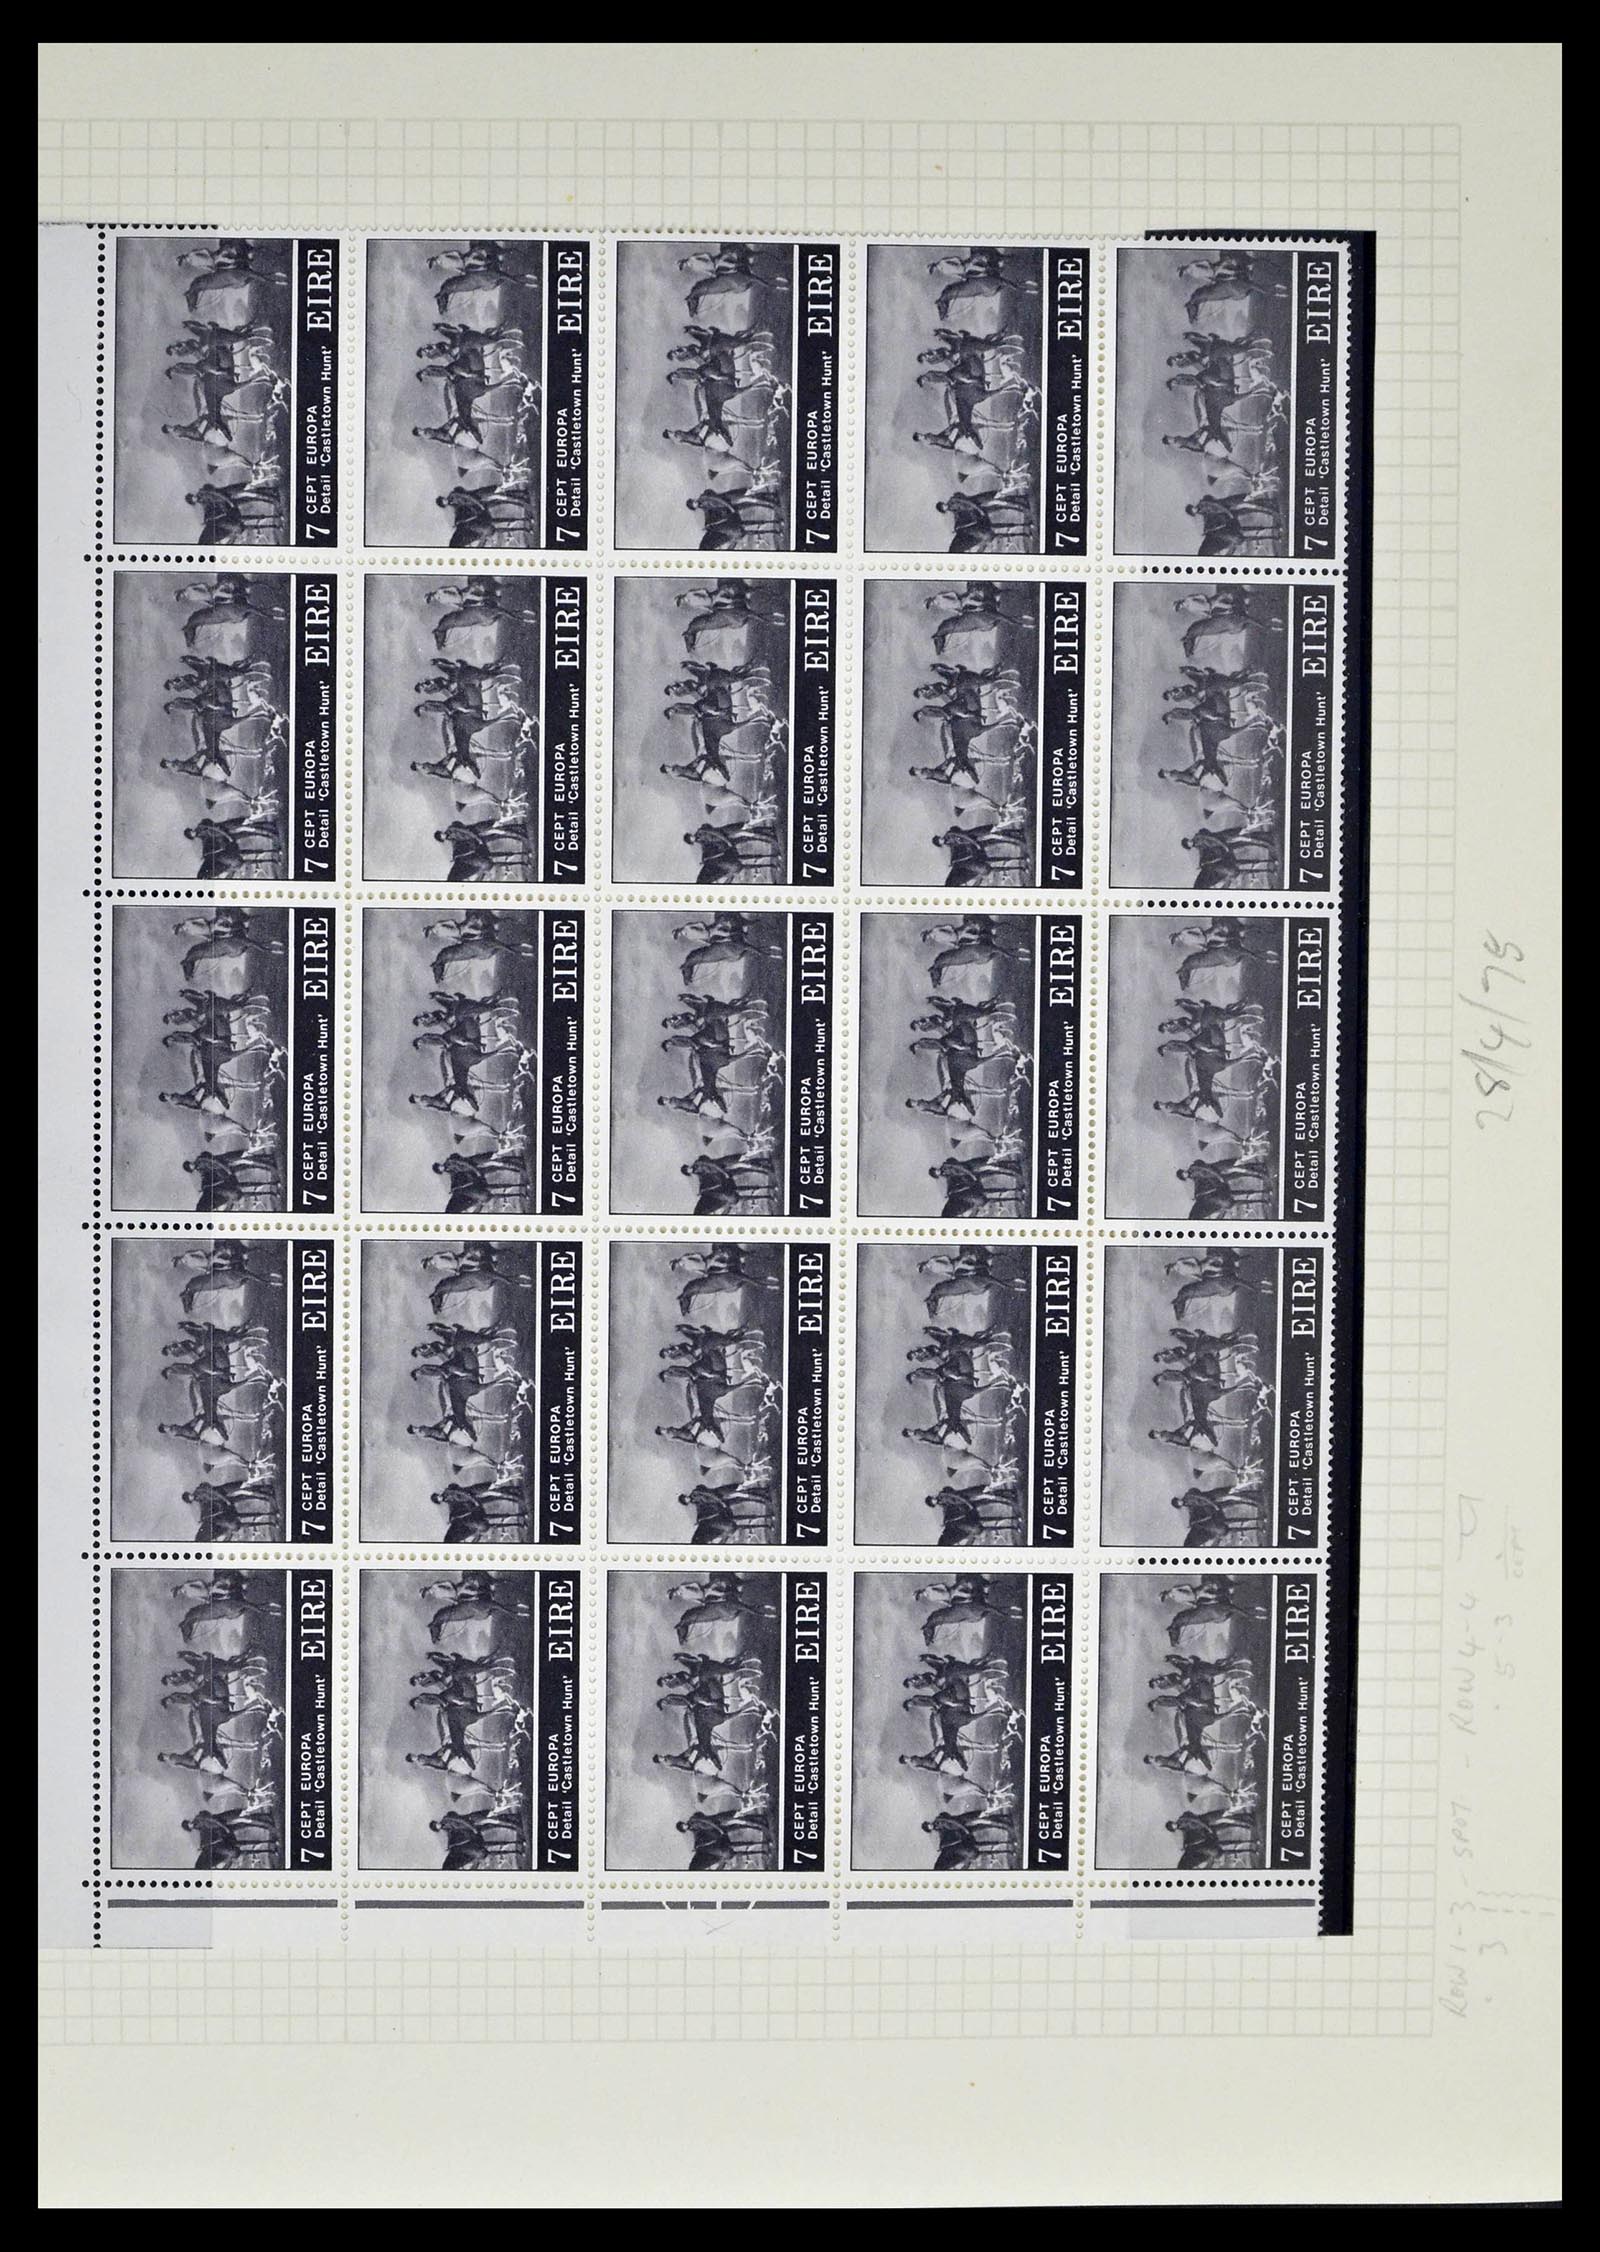 39272 0040 - Stamp collection 39272 Ireland plateflaws and varities 1963-1981.